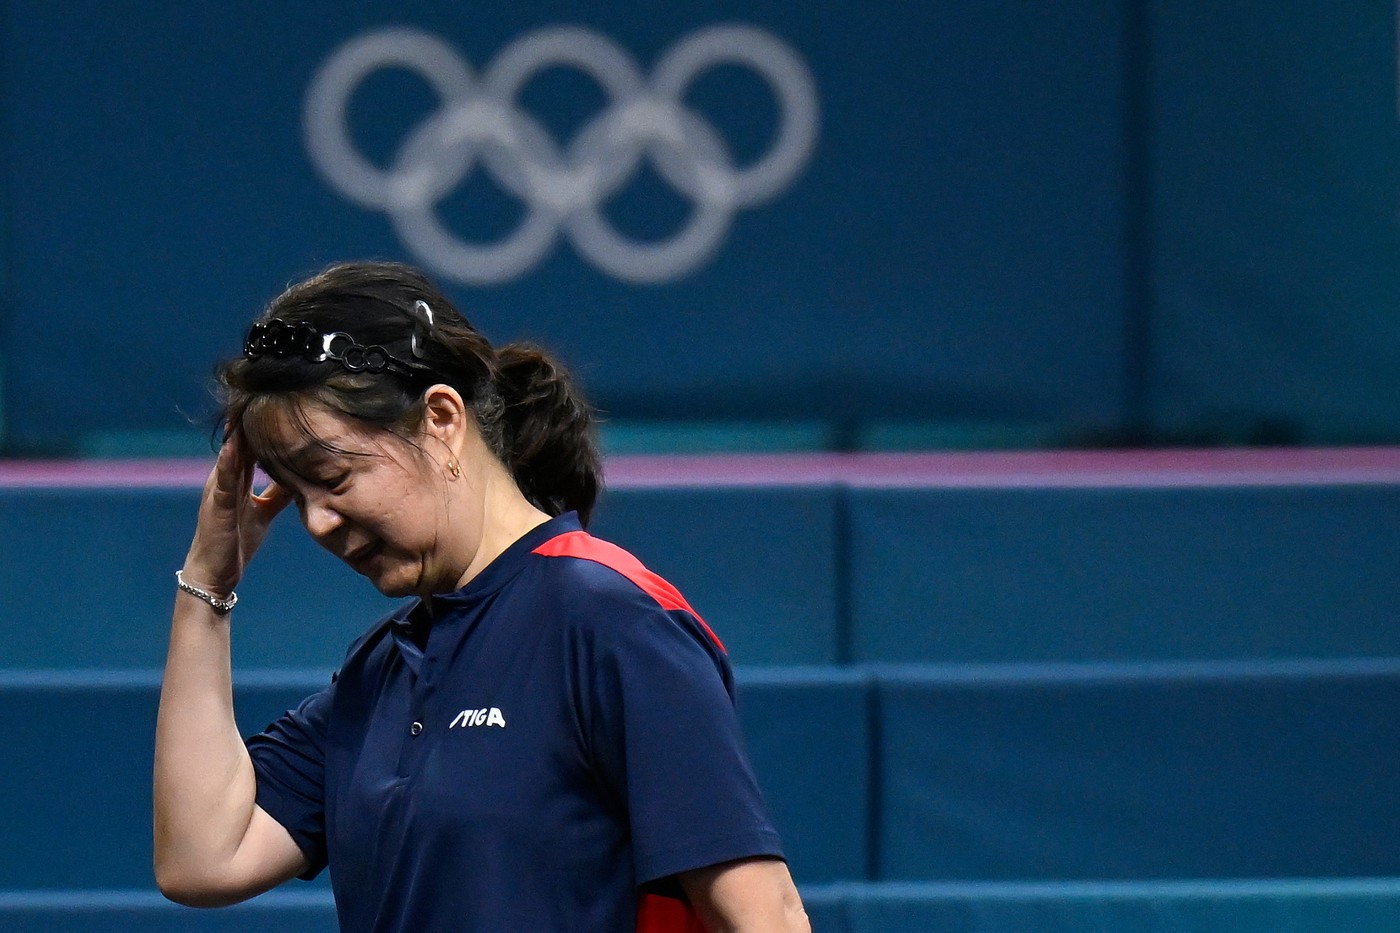 Chile's Zhiying Zeng reacts as she plays against Lebanon's Mariana Sahakian during their women's table tennis singles preliminary round at the Paris 2024 Olympic Games at the South Paris Arena in Paris on July 27, 2024.,Image: 893033249, License: Rights-managed, Restrictions: , Model Release: no